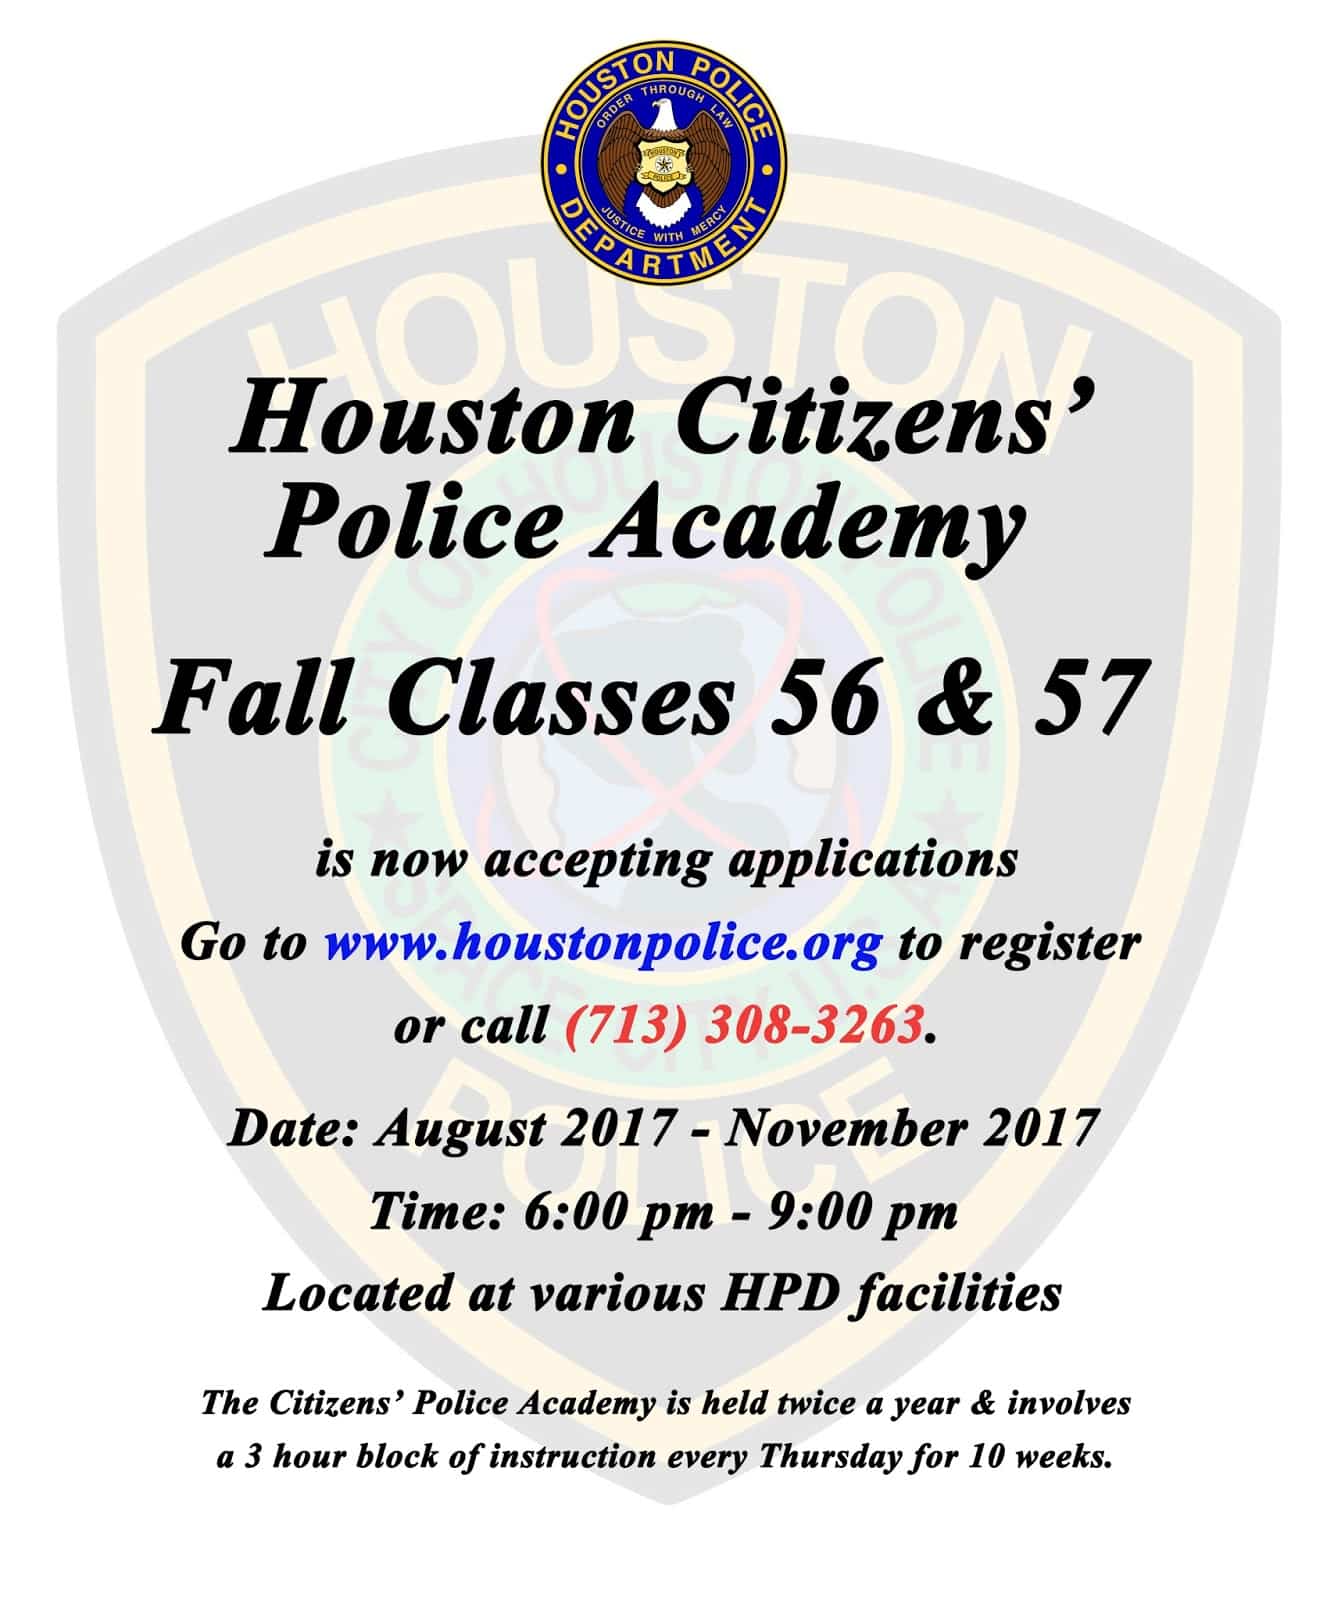 Houston Police Community Blog: Come join the HPD Citizens